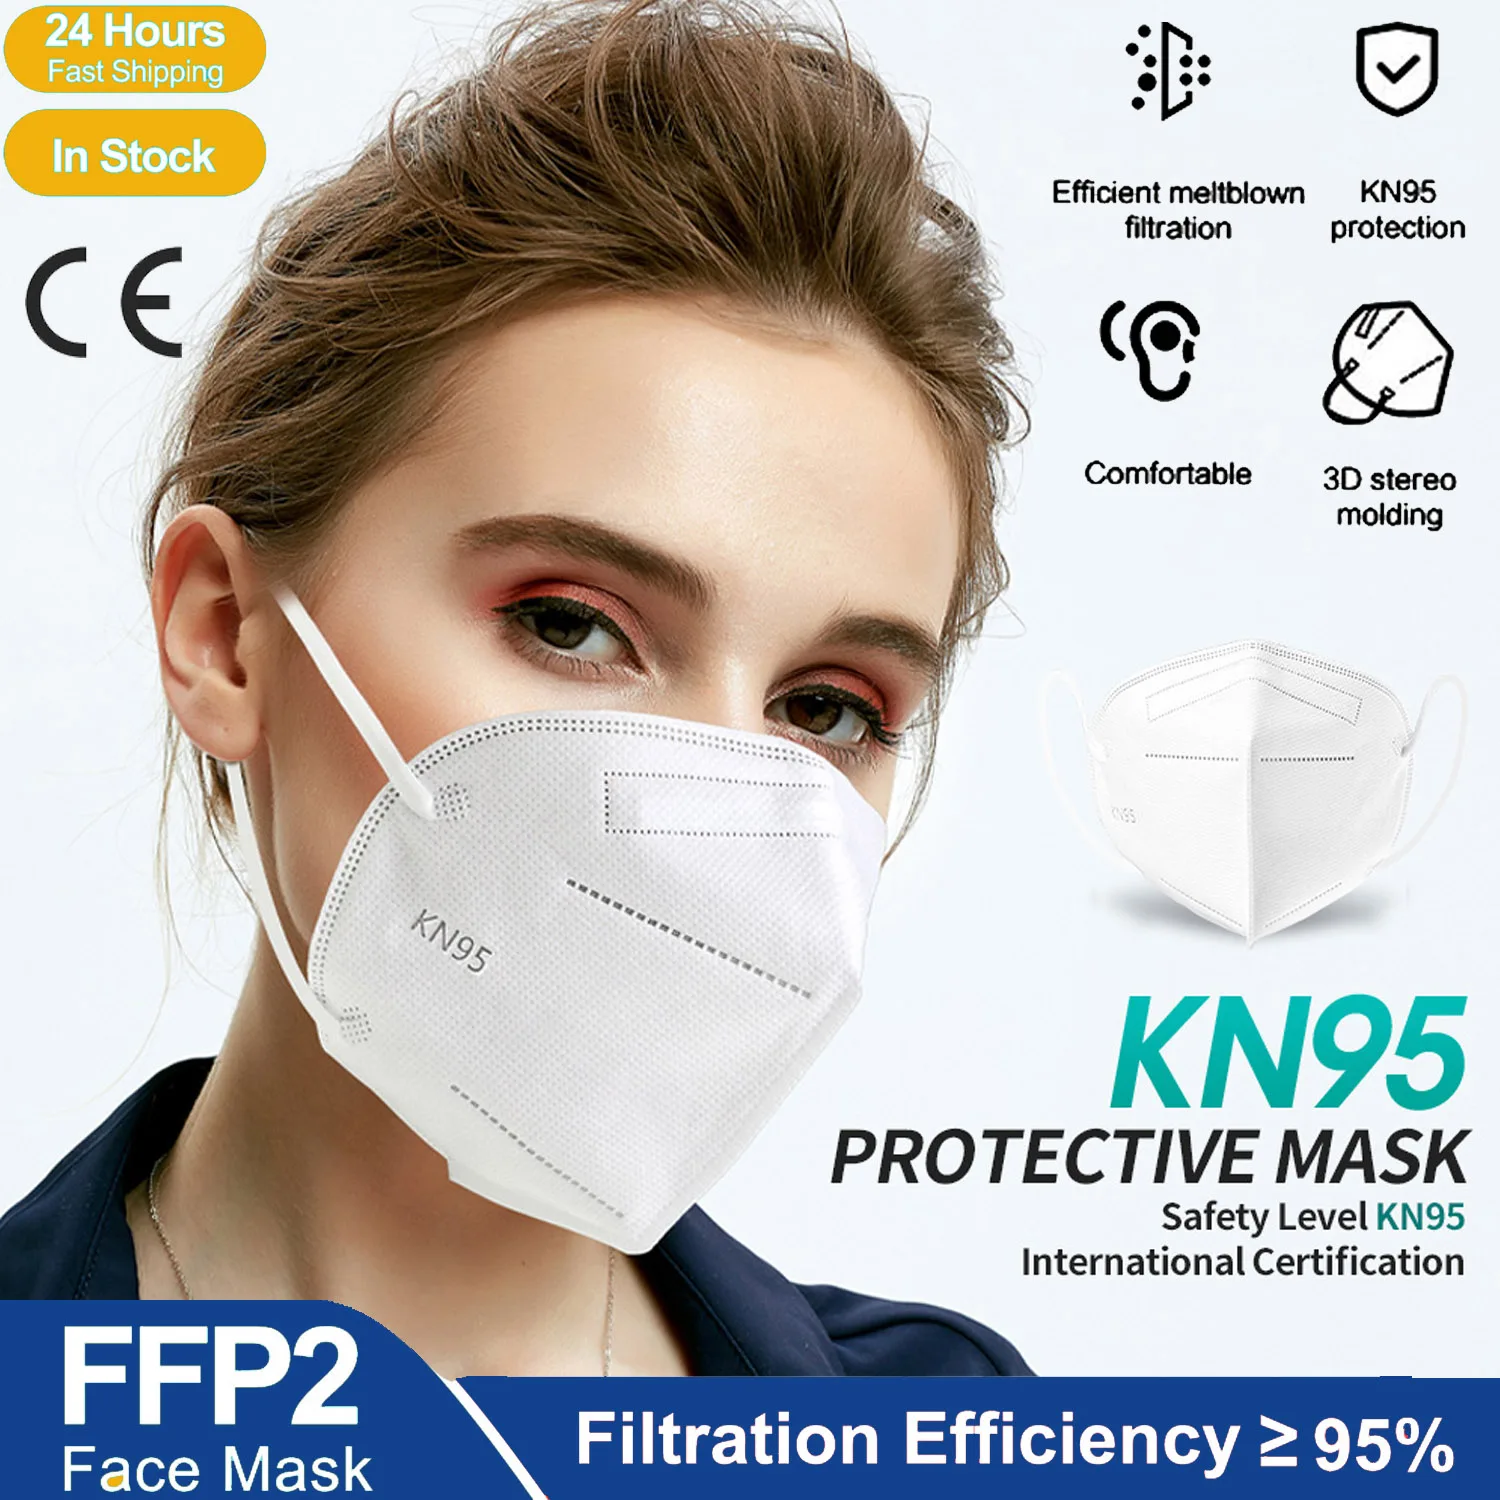 

10-200 Pieces KN95 Mask CE FFP2 Mascarillas 5 Layers Filter Protective Health Care Mouth Masks FFP2Mask 95% Respirator Masque